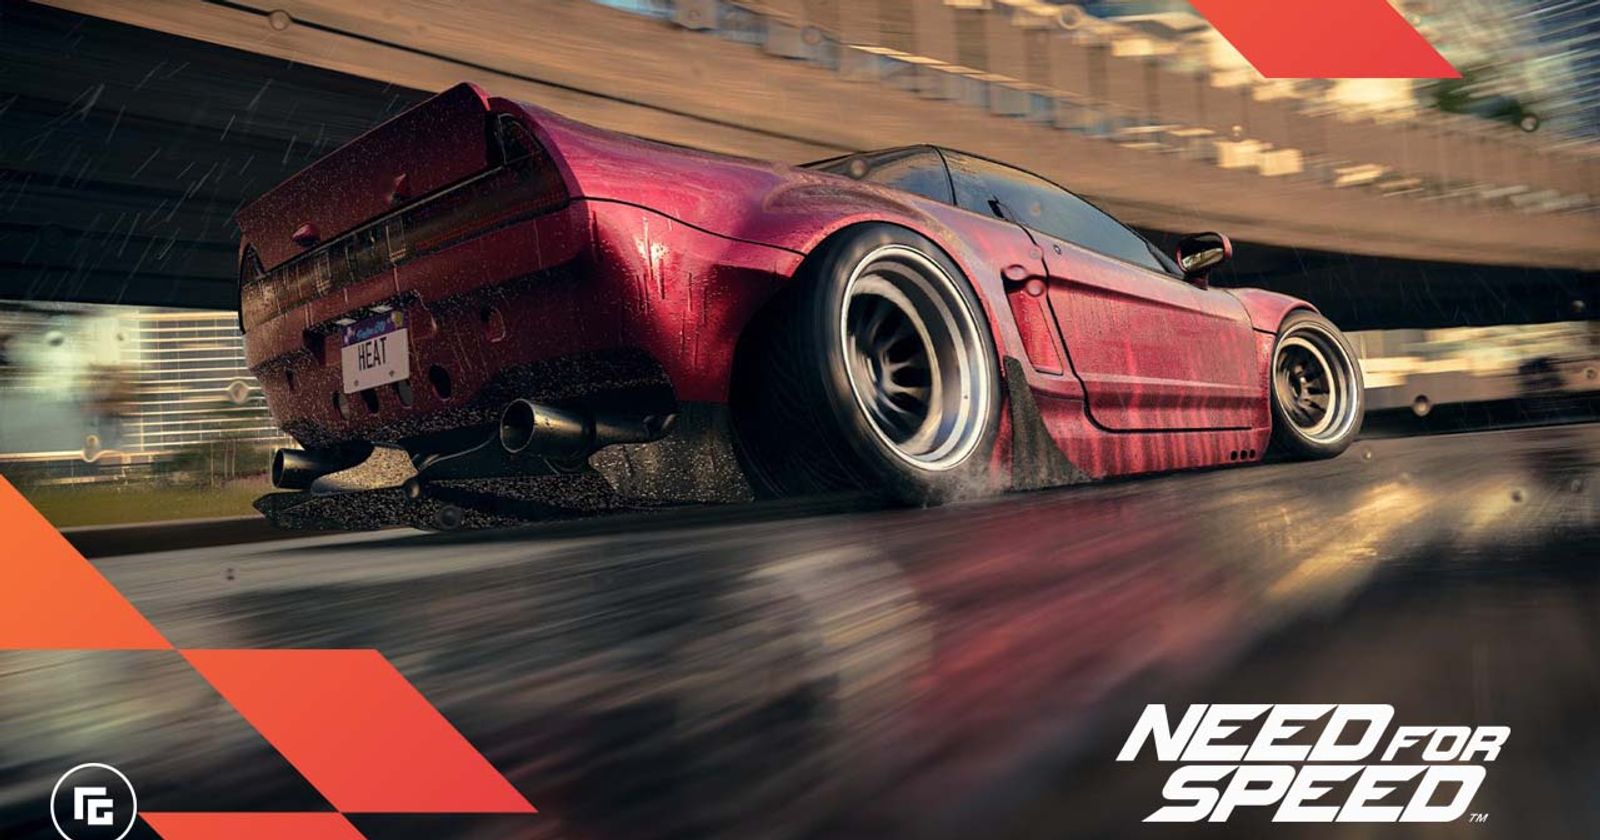 New Need for Speed confirmed for launch before April 2023